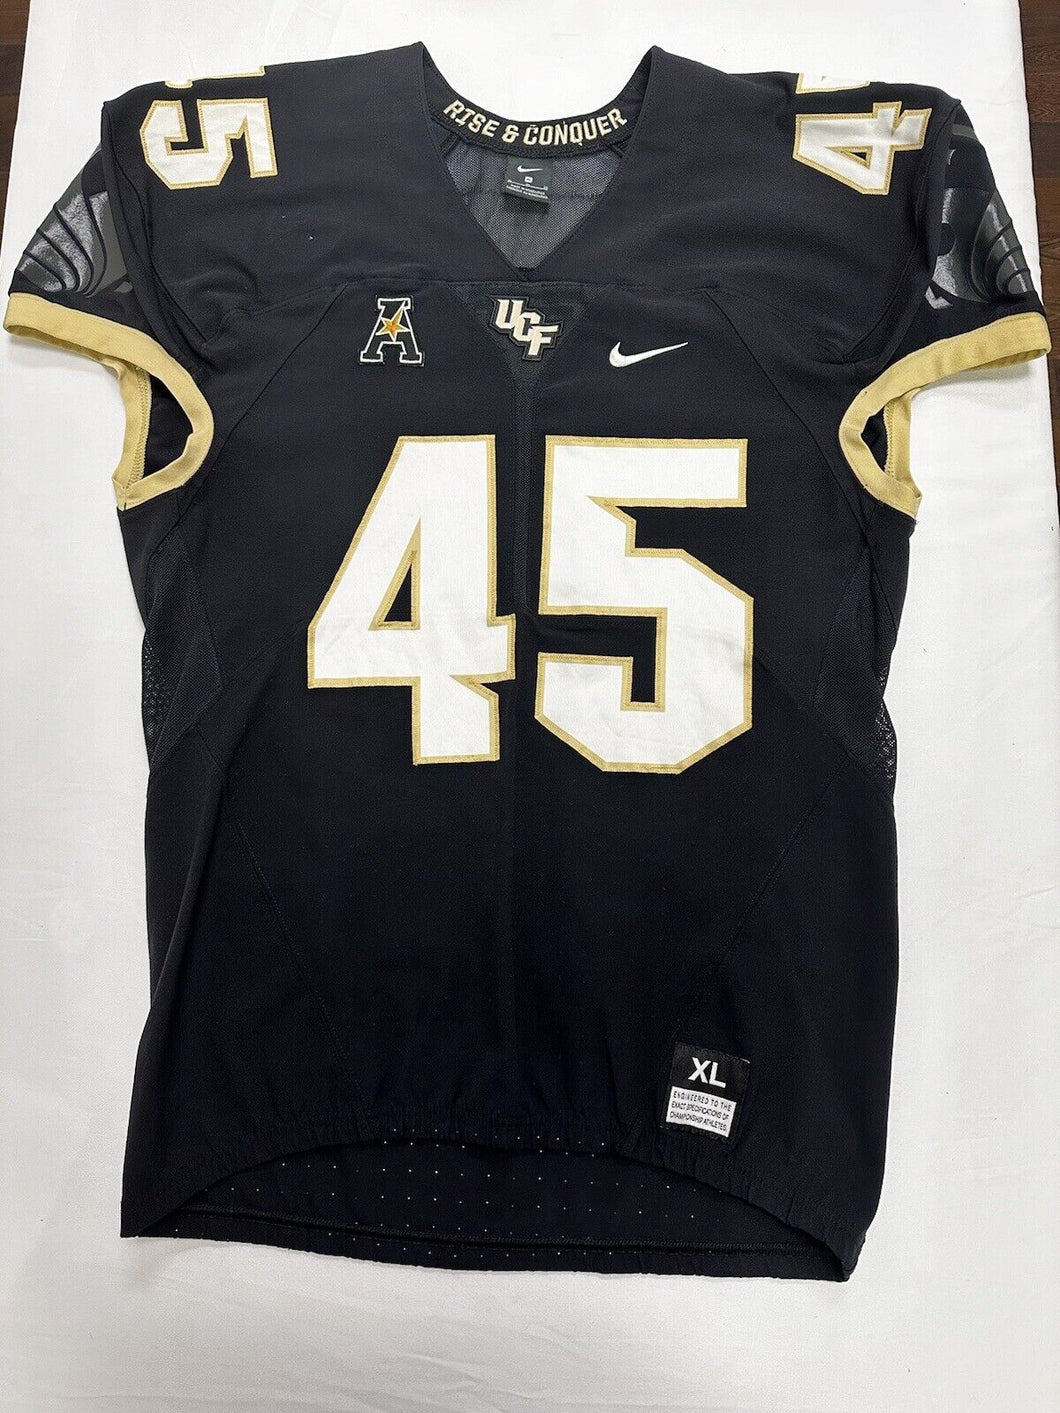 UCF Knights Game Used / Game Worn Nike Football Jersey - #45 Size XL